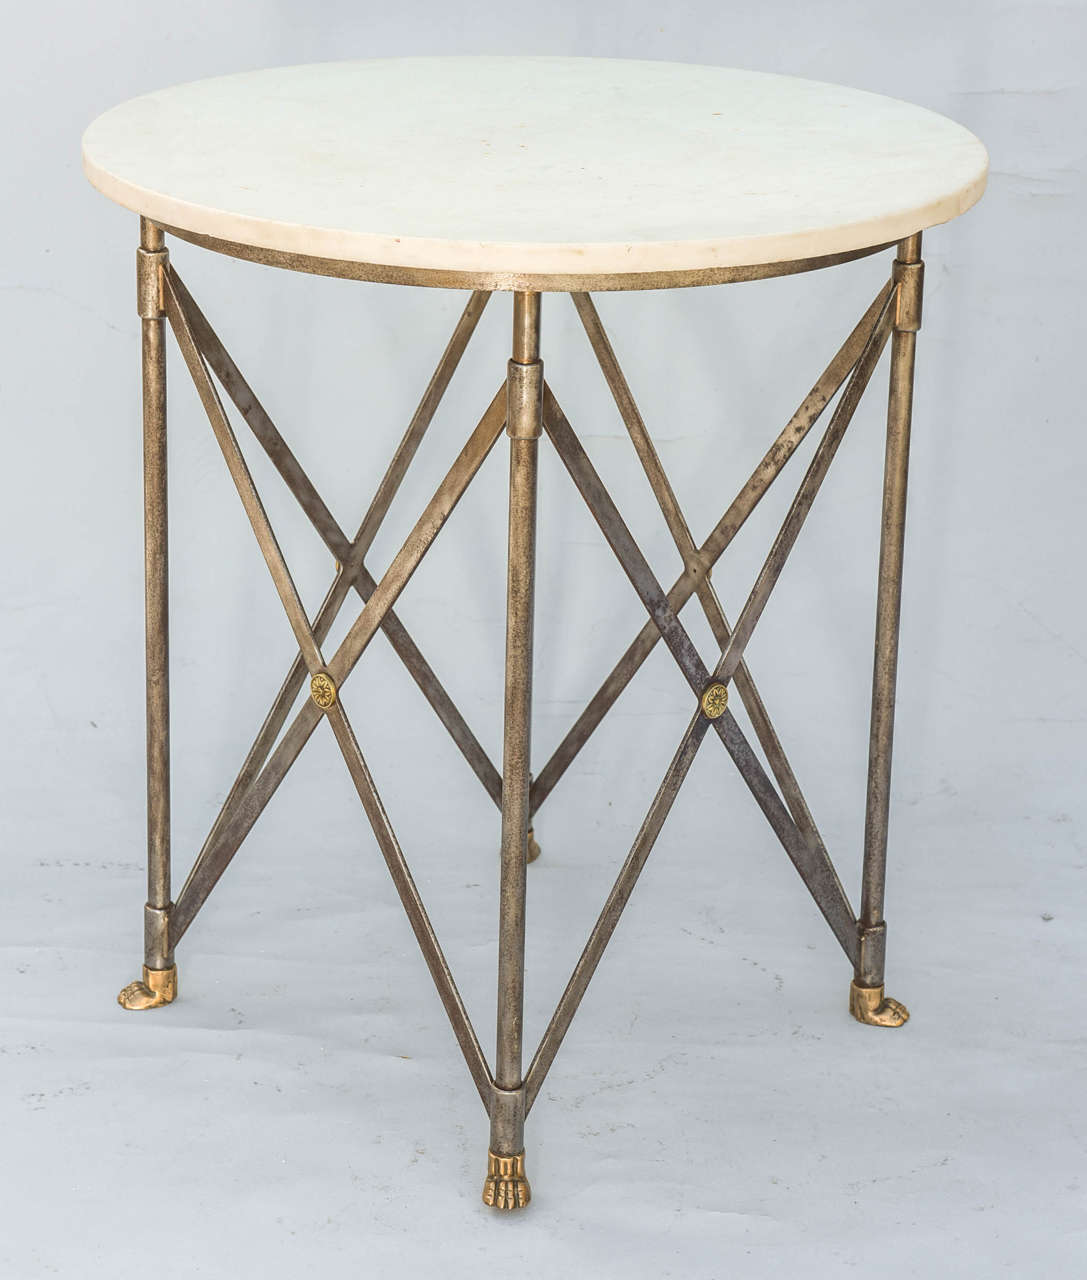 Occasional table, having a round top of white marble, on iron base, its four round legs joined by crossed vertical stretchers centered by a rosette, ending in brass paw feet.

Stock ID: D7777